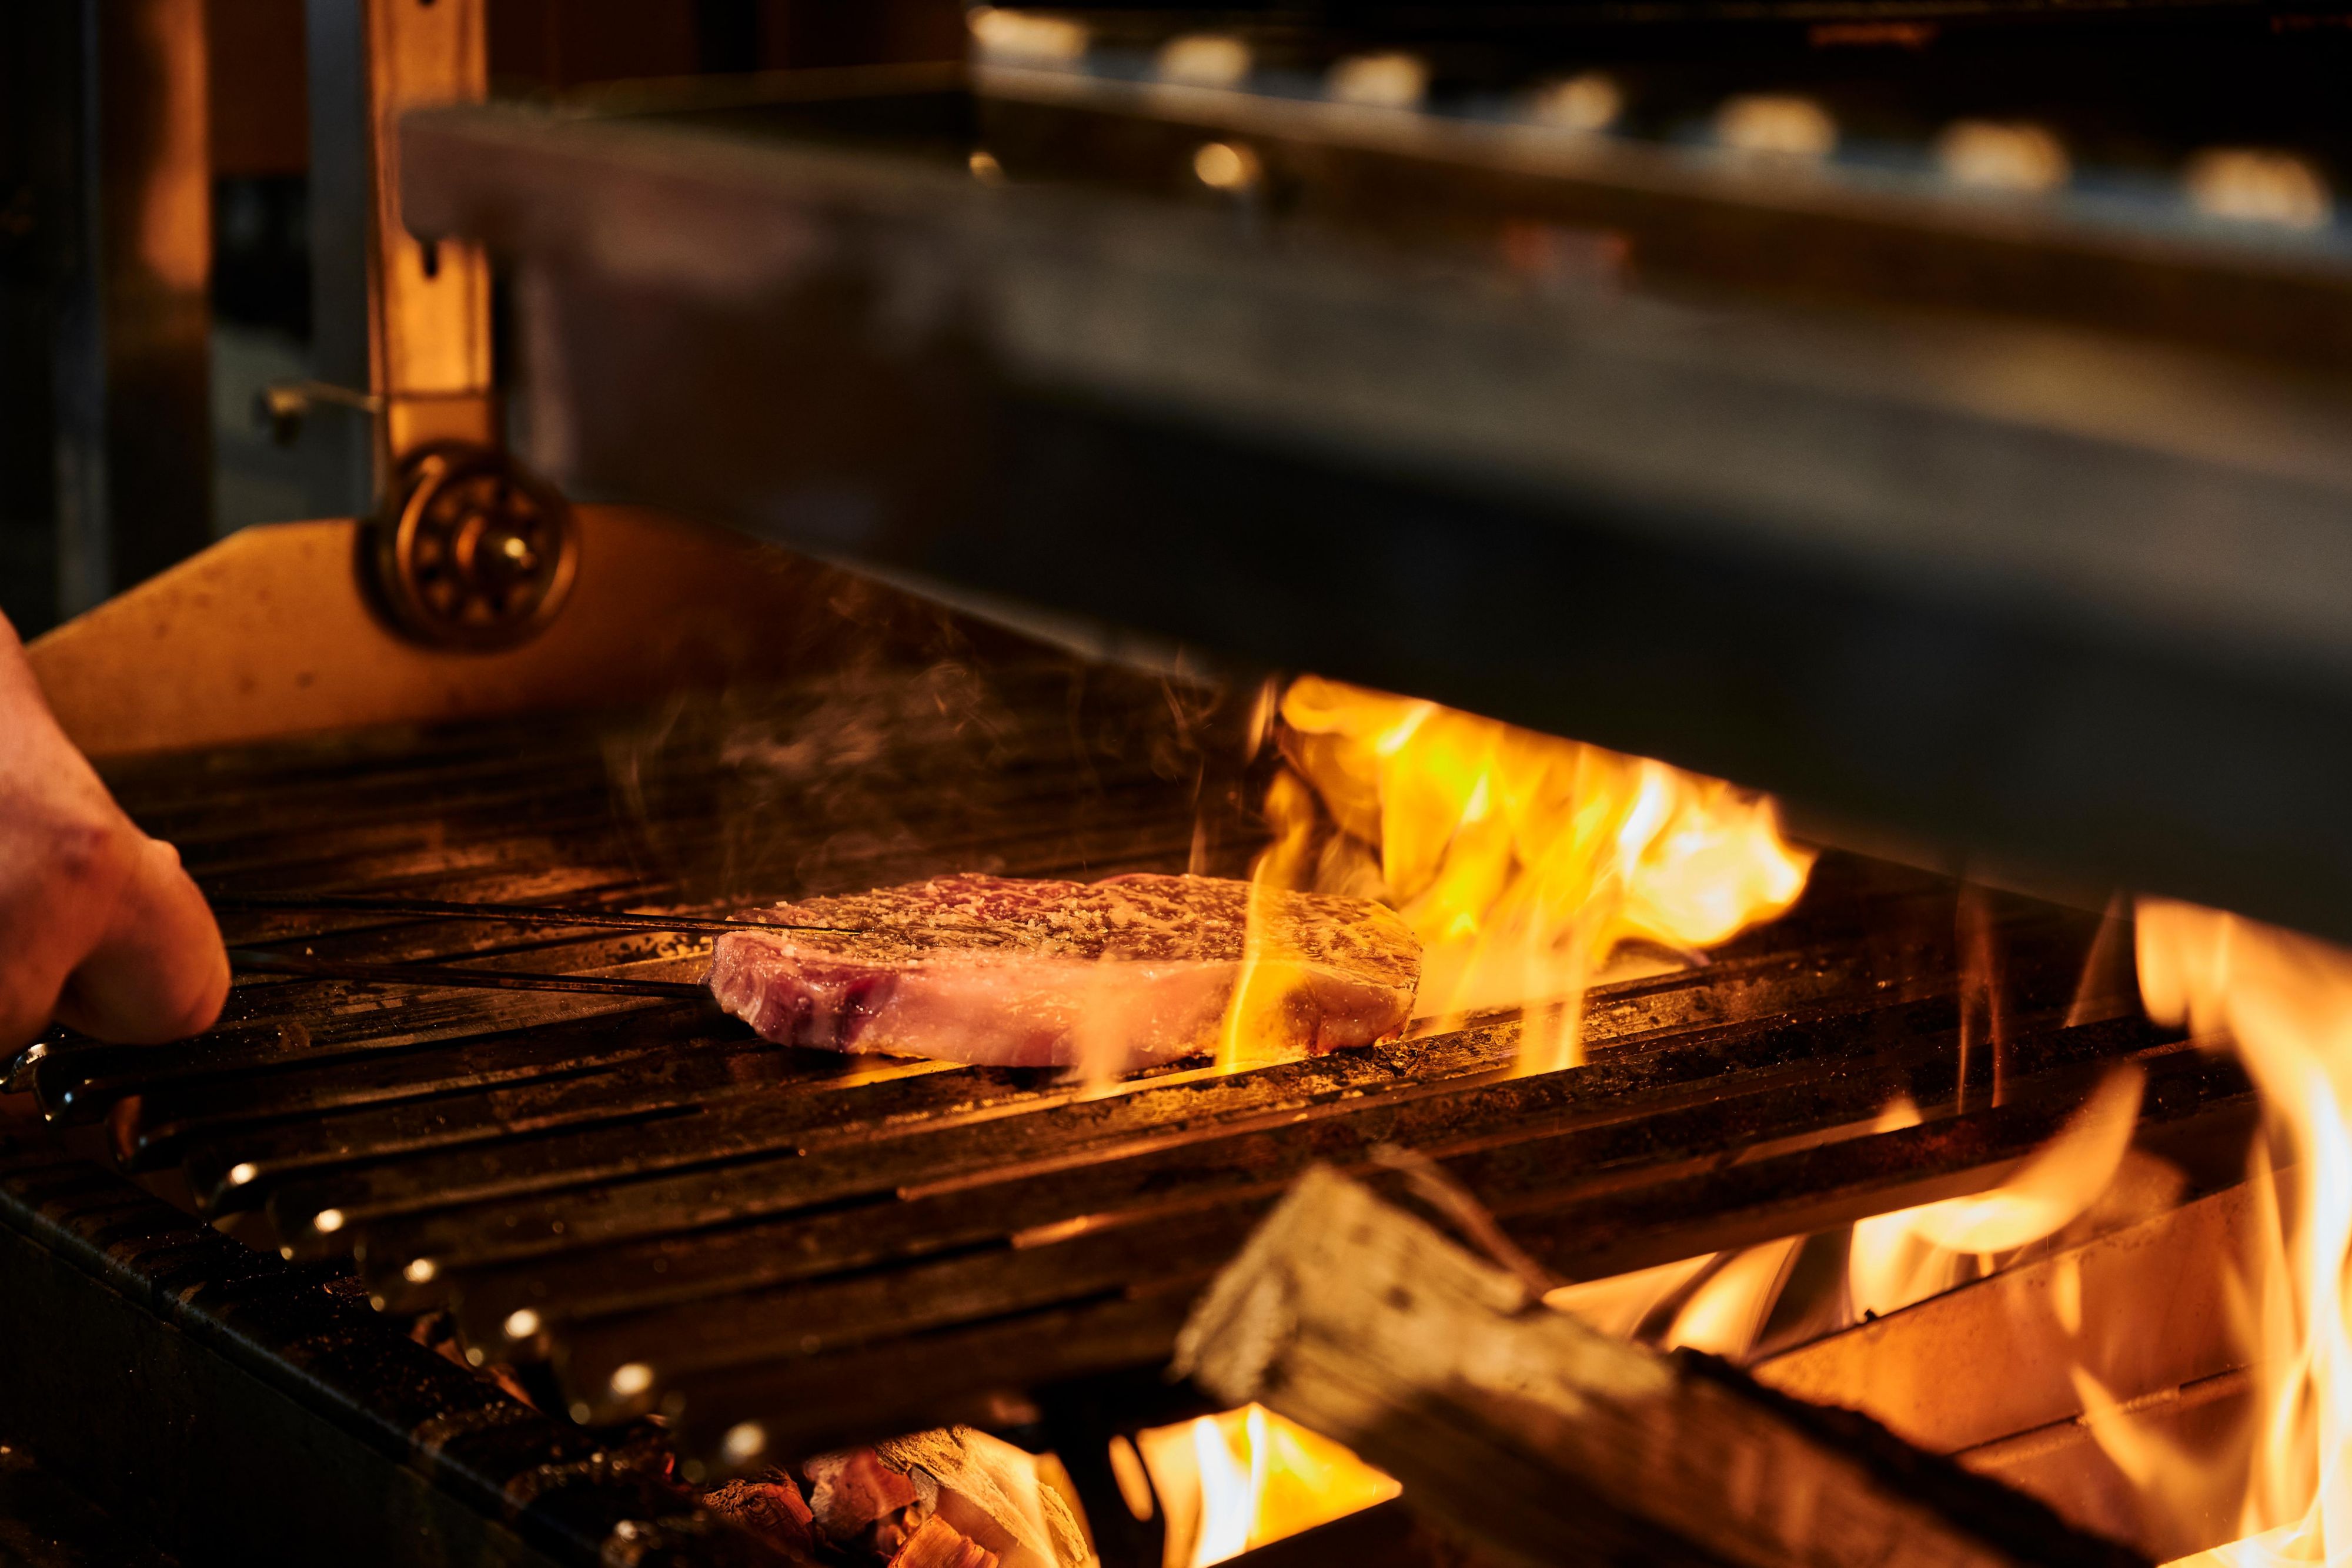 Spend a relaxing time surrounded by the mellow aroma and sound of a wood-burning grill, and a variety of dishes made with local ingredients. Here is the "flame" that brings out the flavor of the ingredients to the fullest, and the hospitality that ignites curiosity.

Enjoy a quality time with your loved ones.